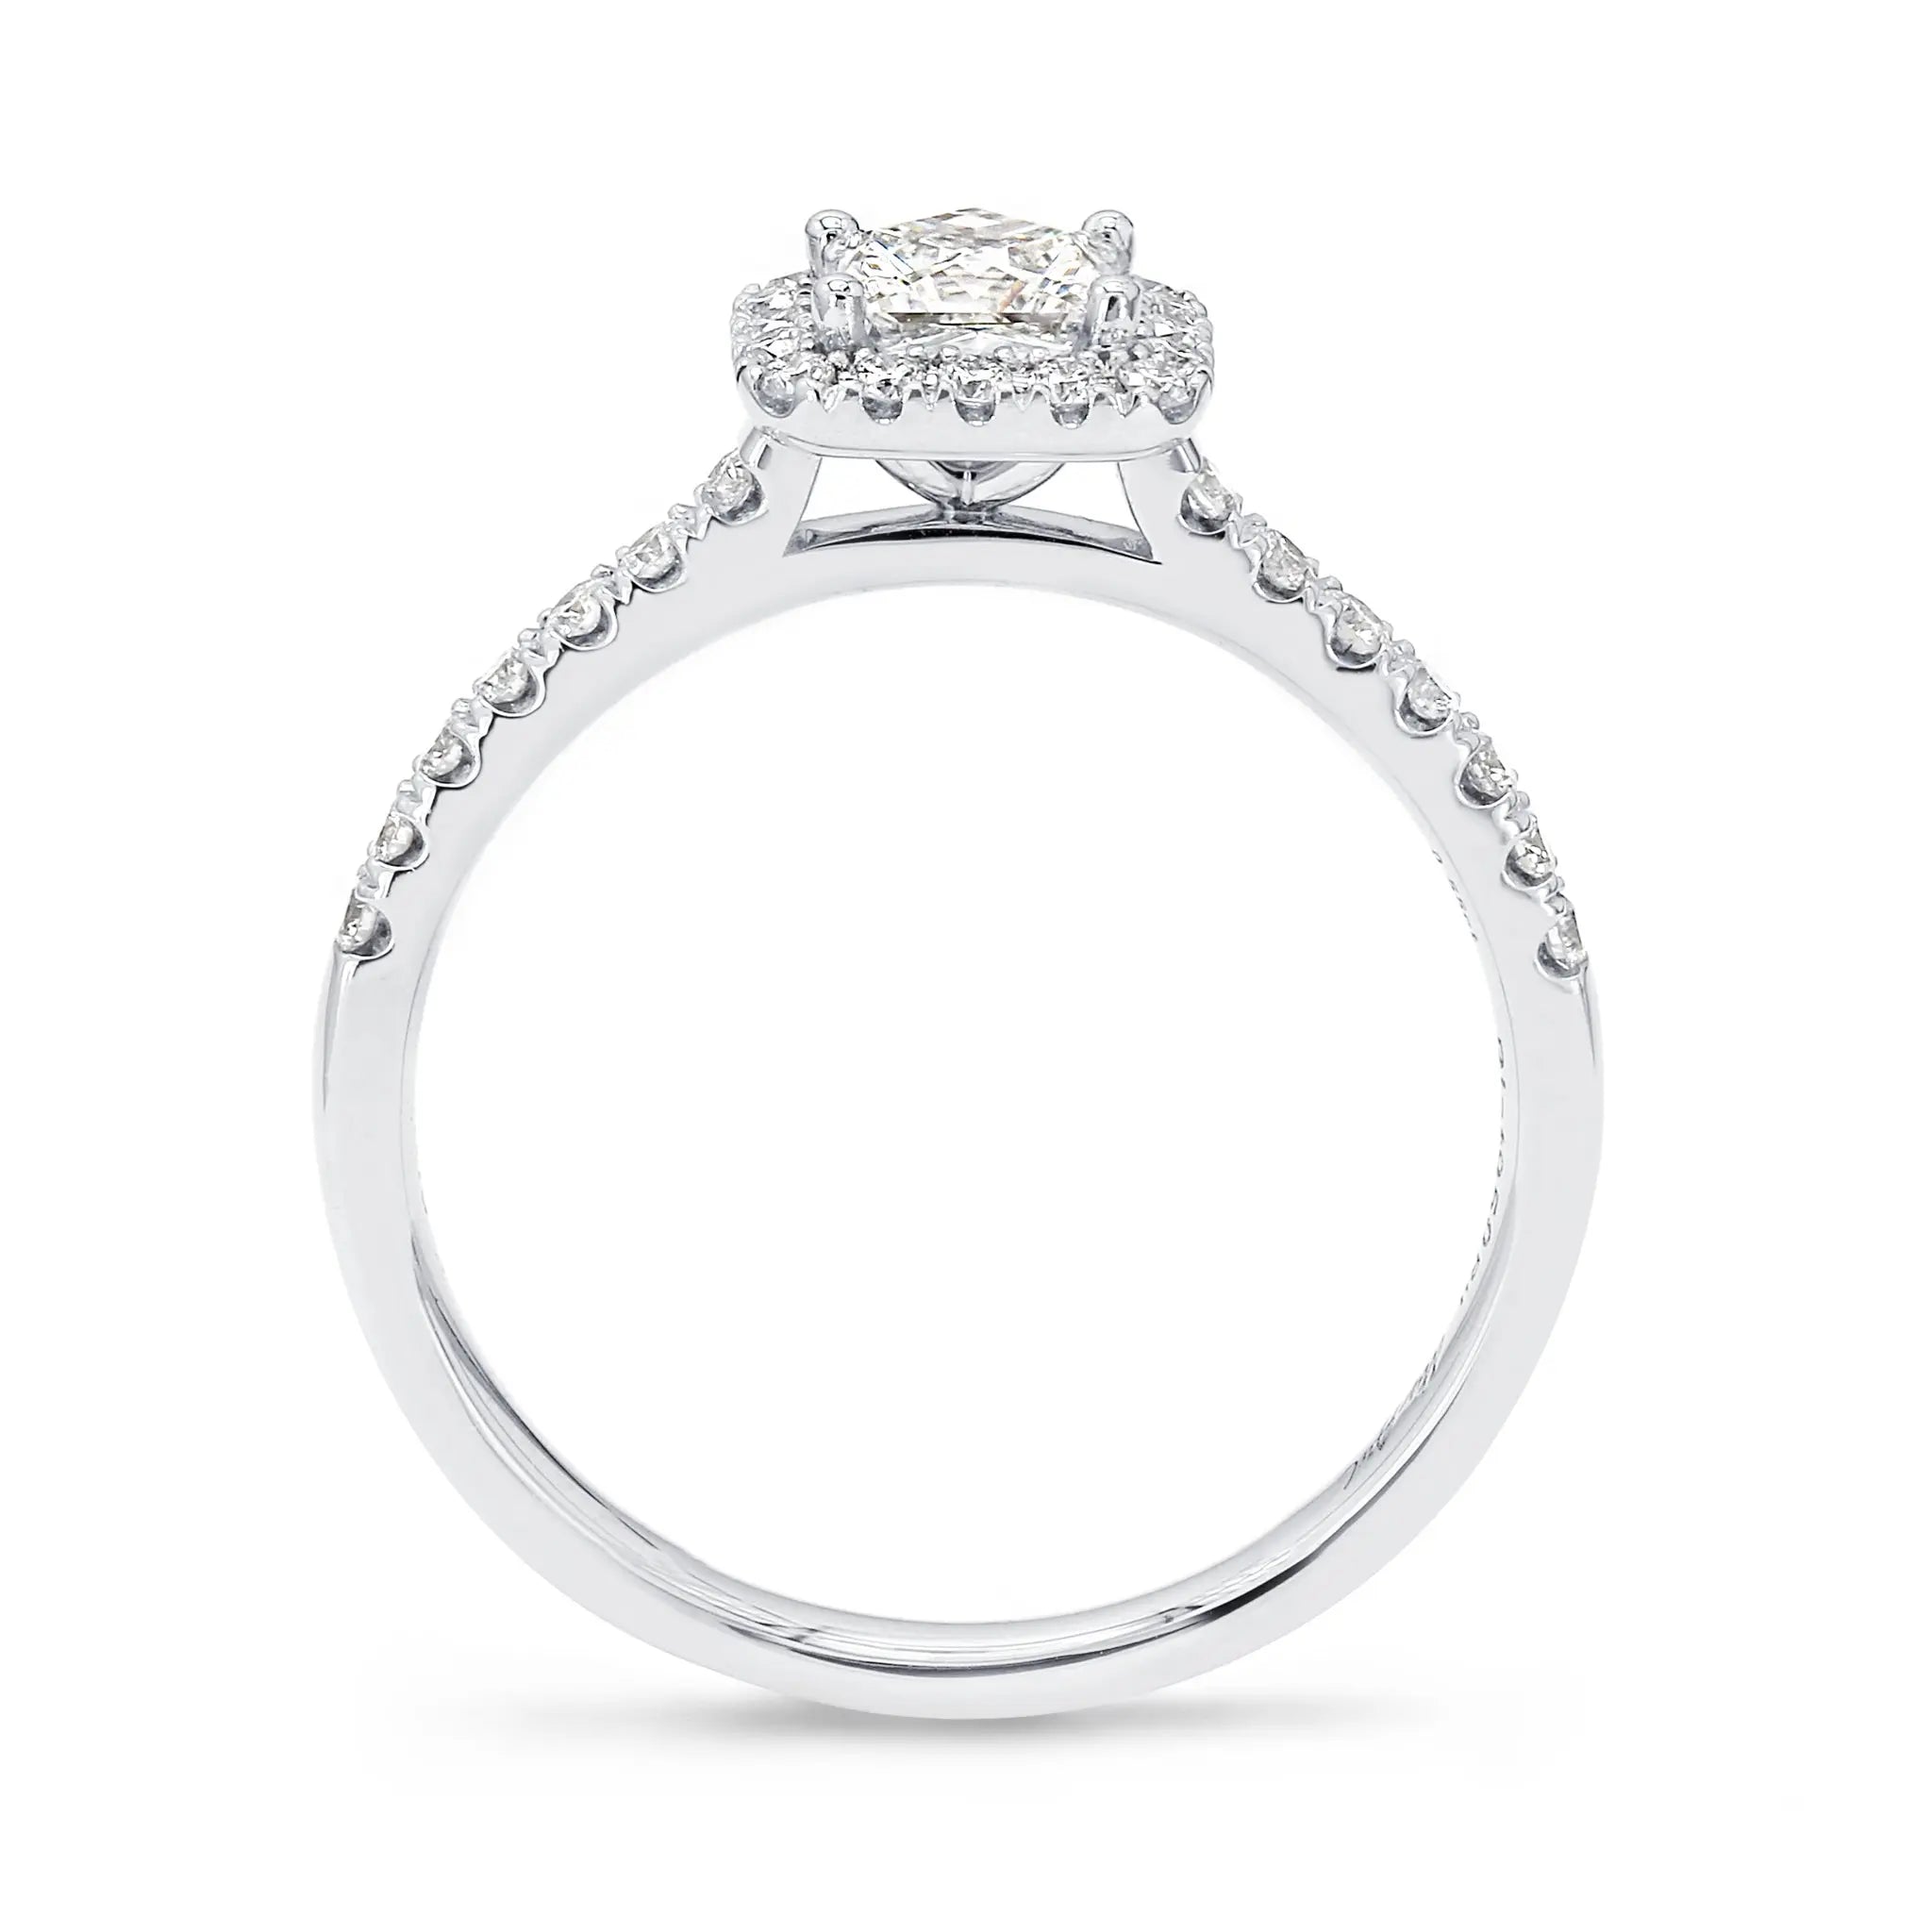 Shimansky - My Girl Diamond Halo Engagement Ring 1.00ct Crafted in 18K White Gold